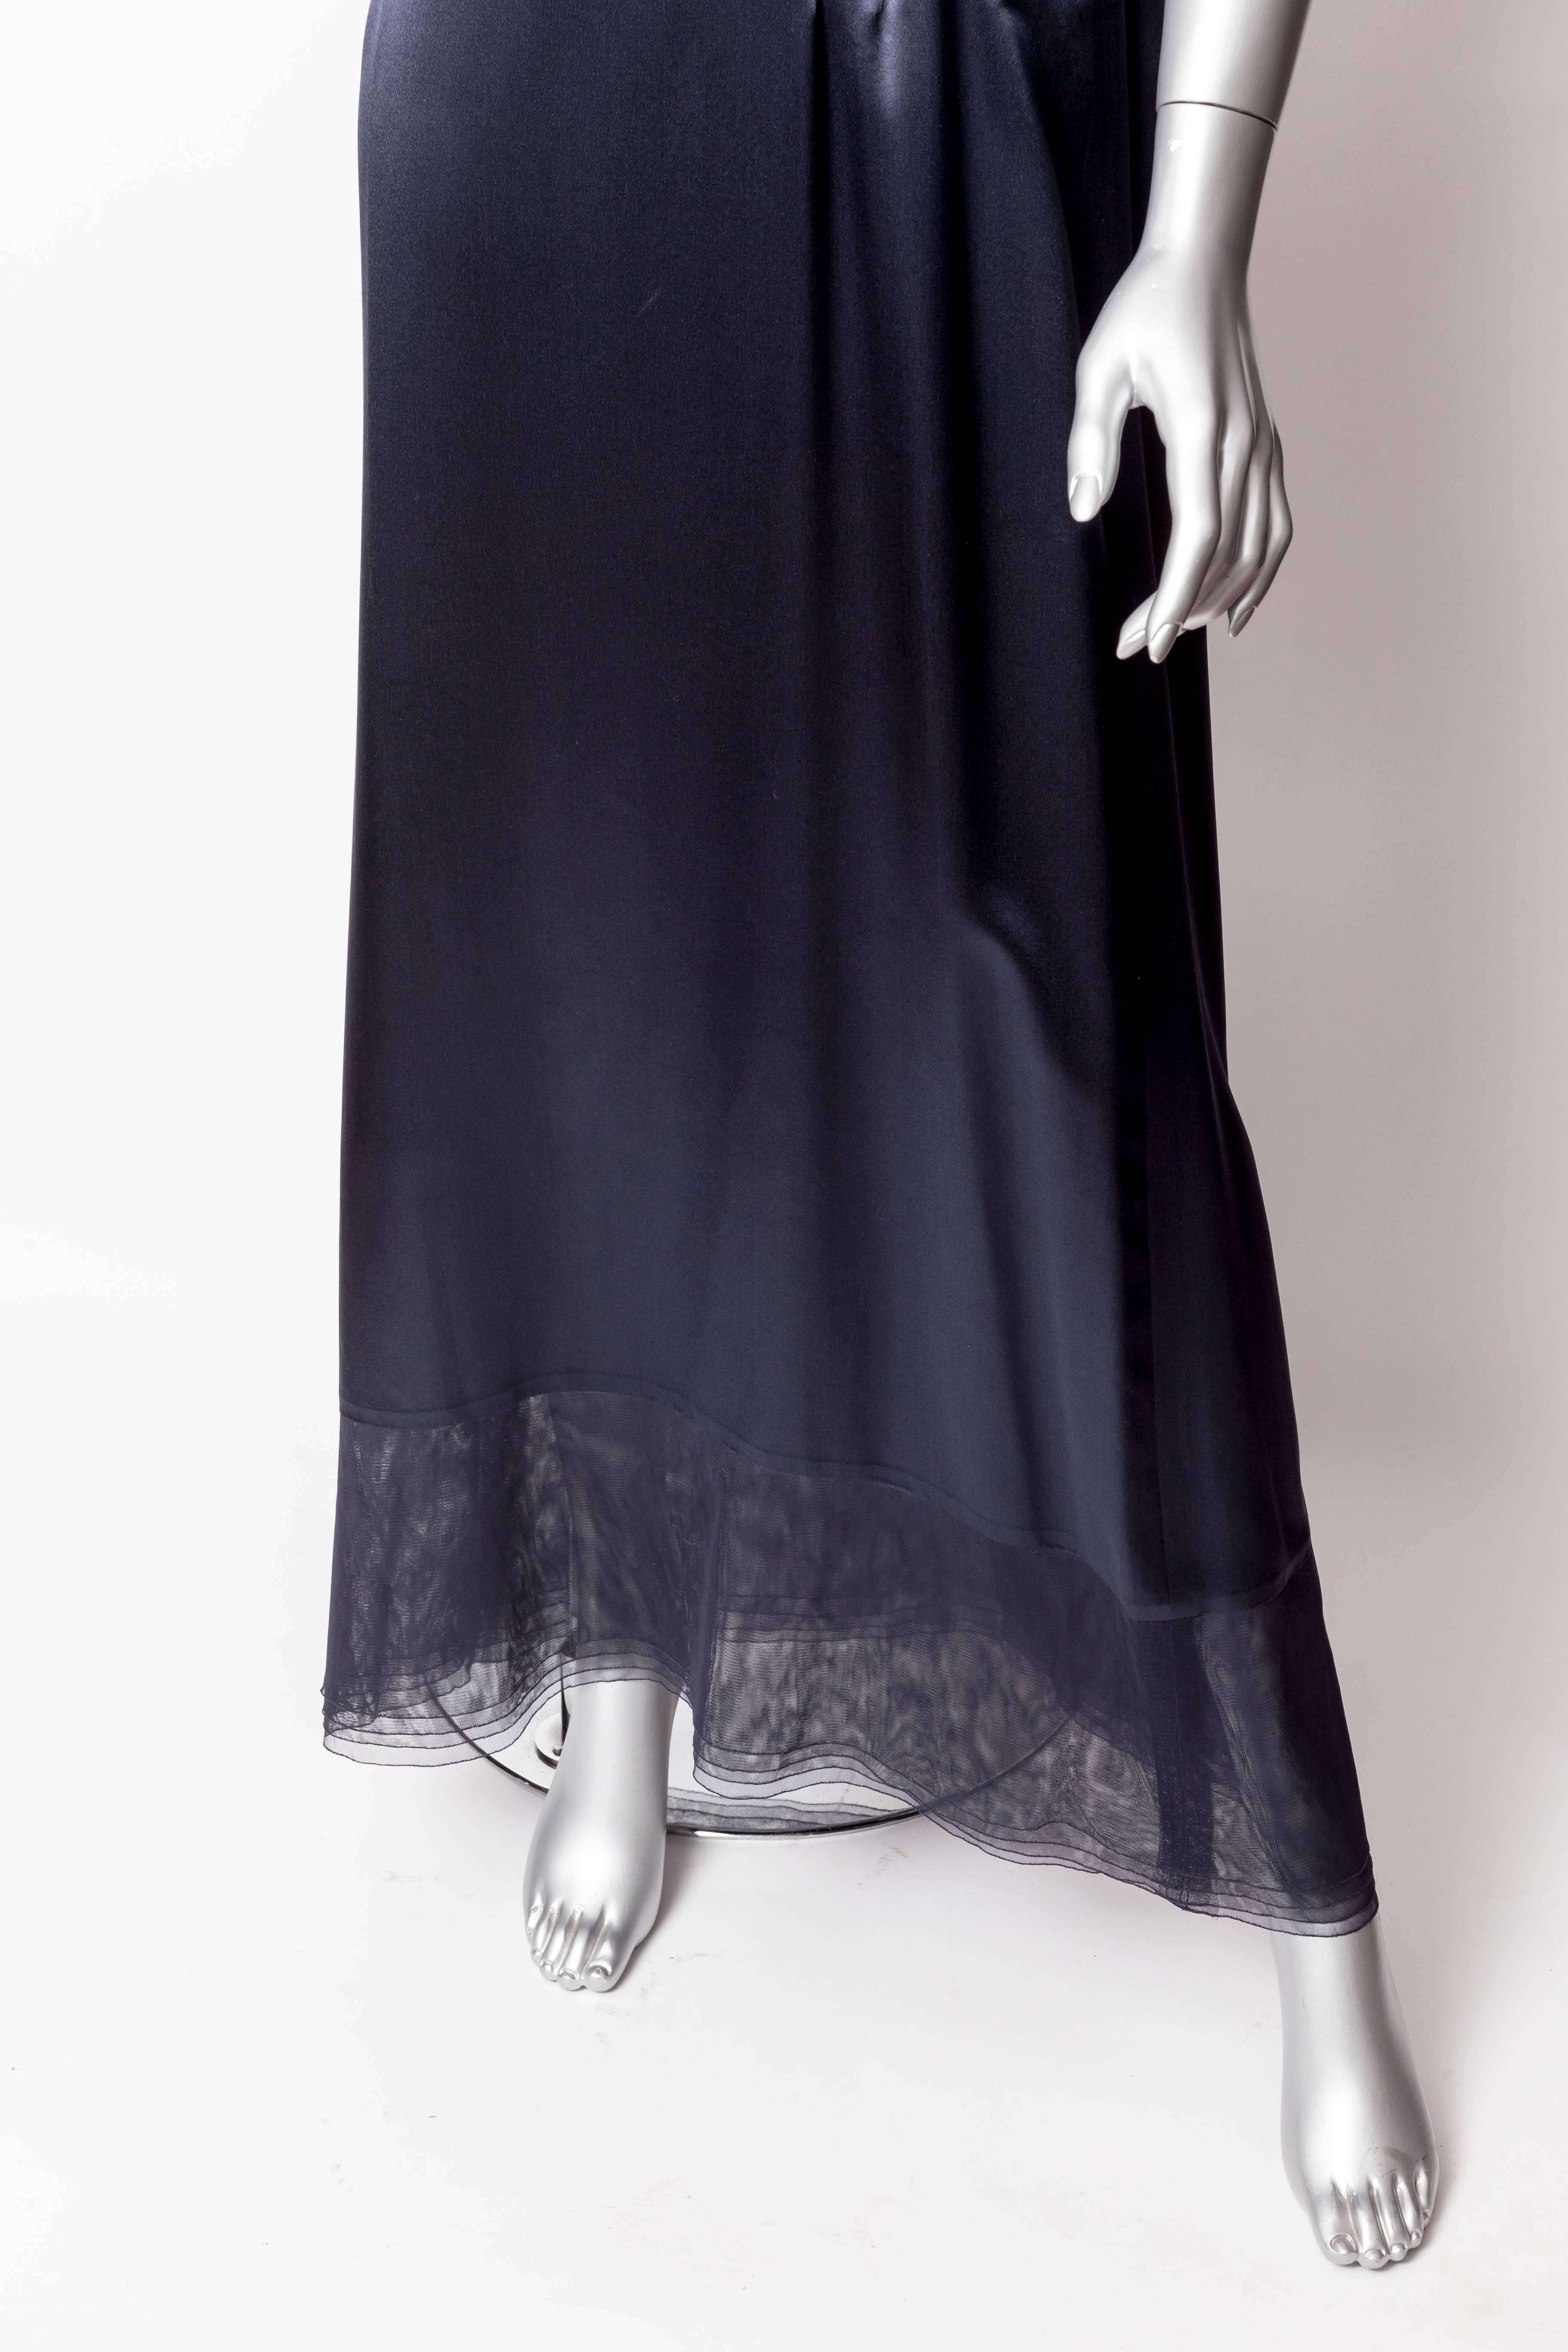 Chanel Dark Blue Silk and Tulle Long Dress with Kimono Style Jacket  For Sale 3